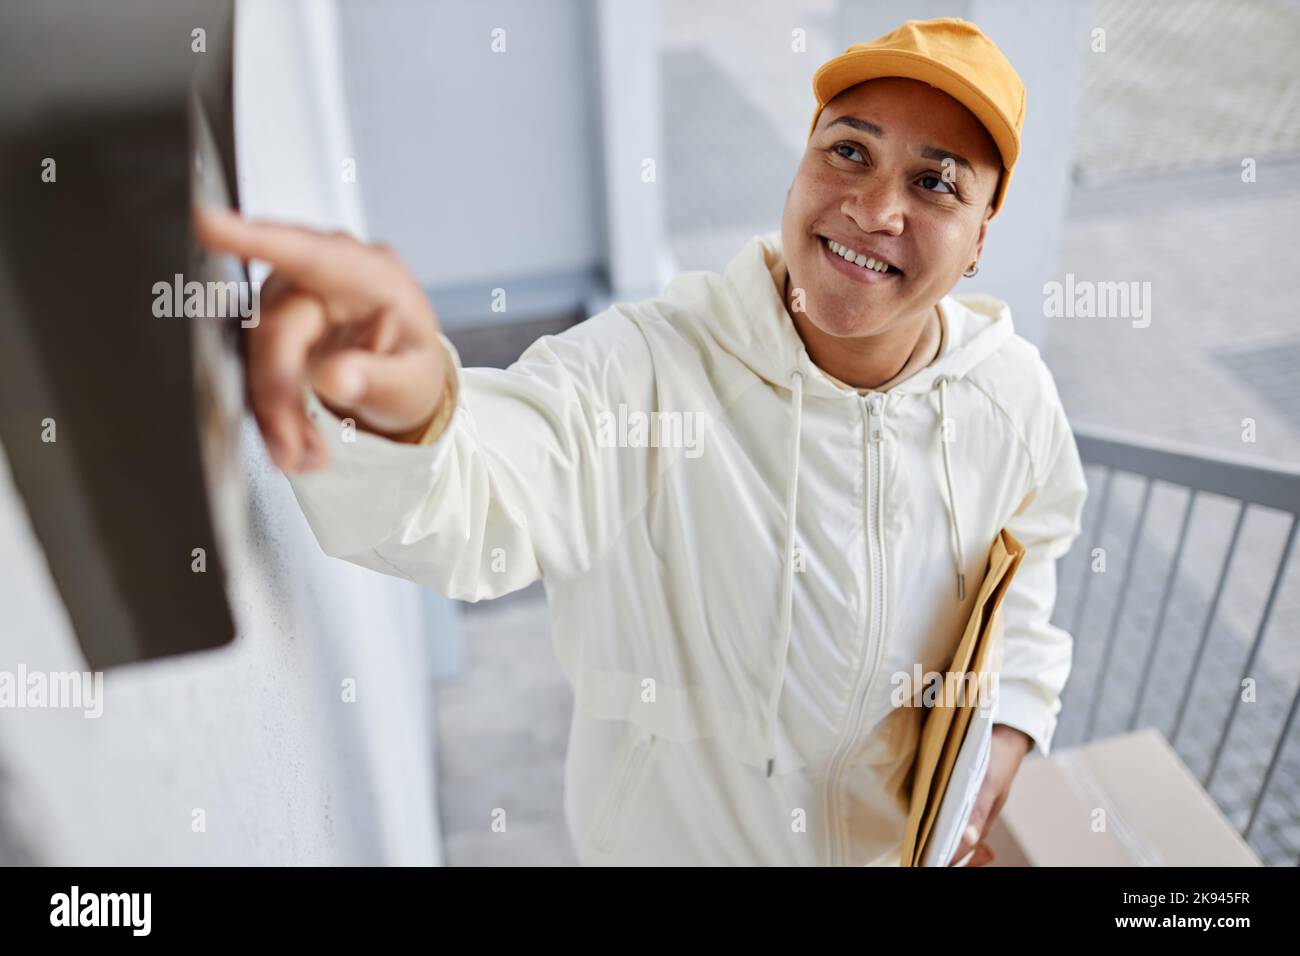 High angle portrait of smiling woman delivering packages and ringing doorbell Stock Photo